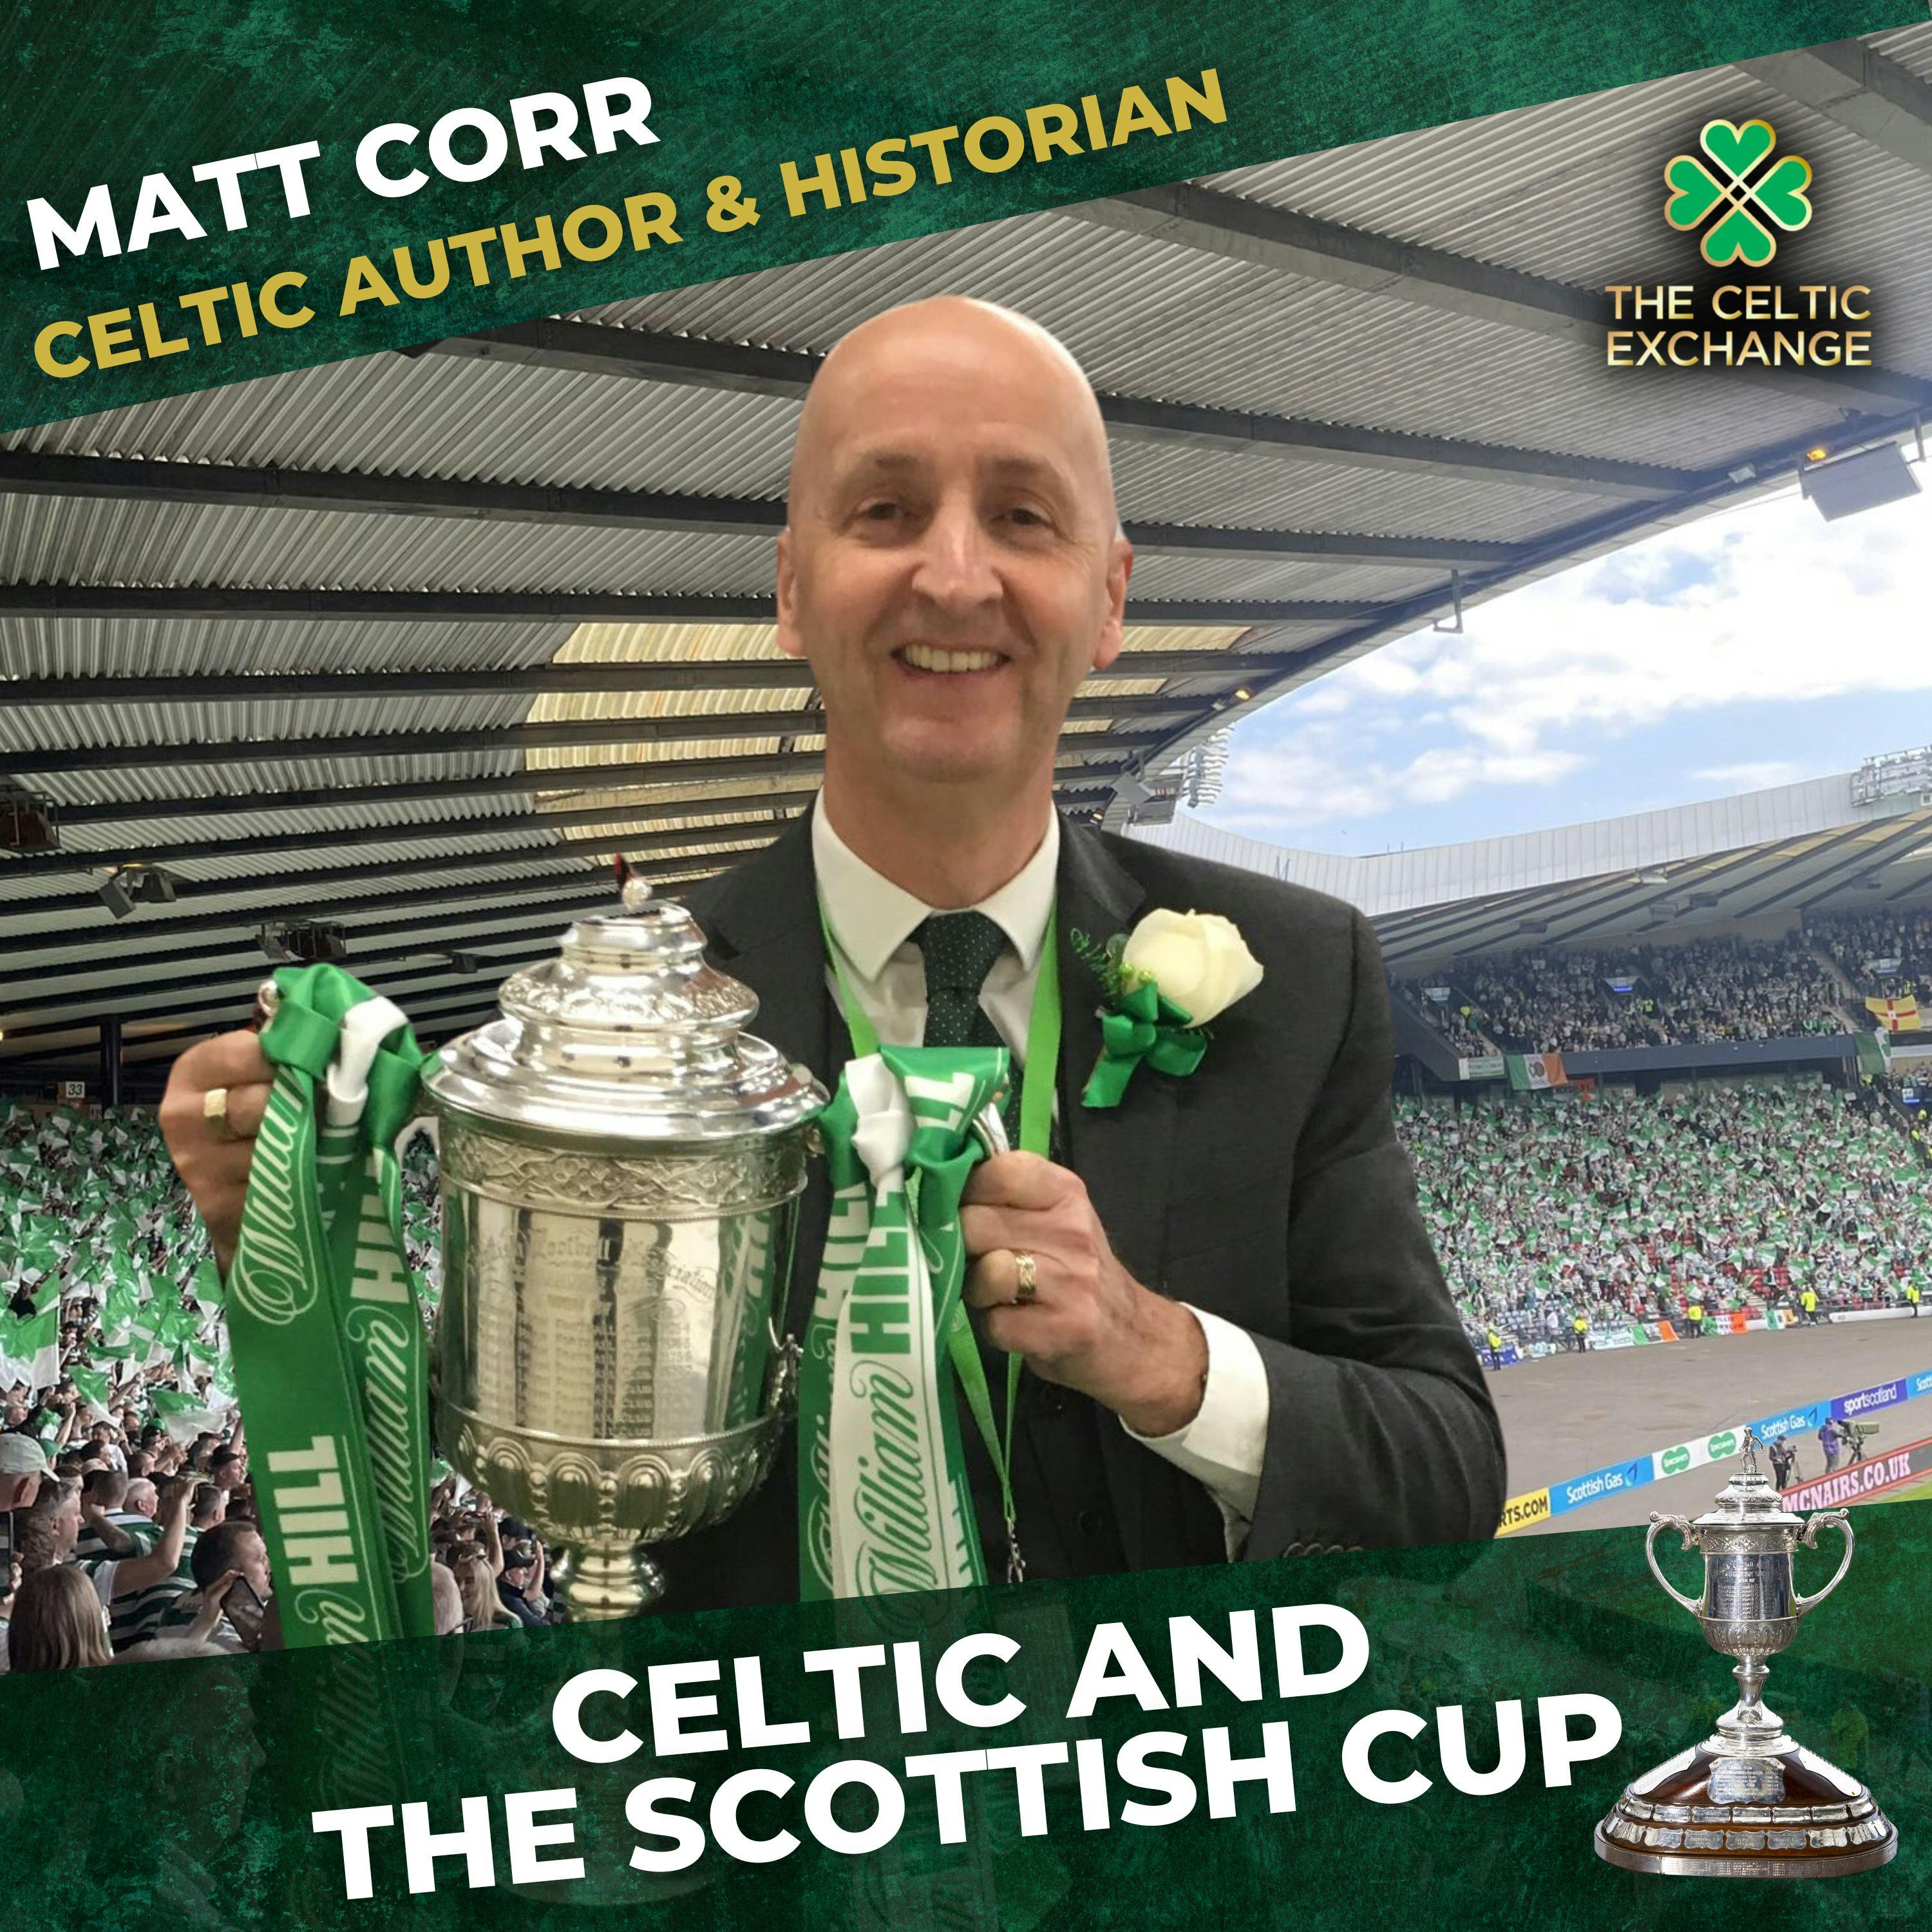 Celtic And The Scottish Cup | A Lifetime Of Memories, With Celtic Author & Historian Matt Corr